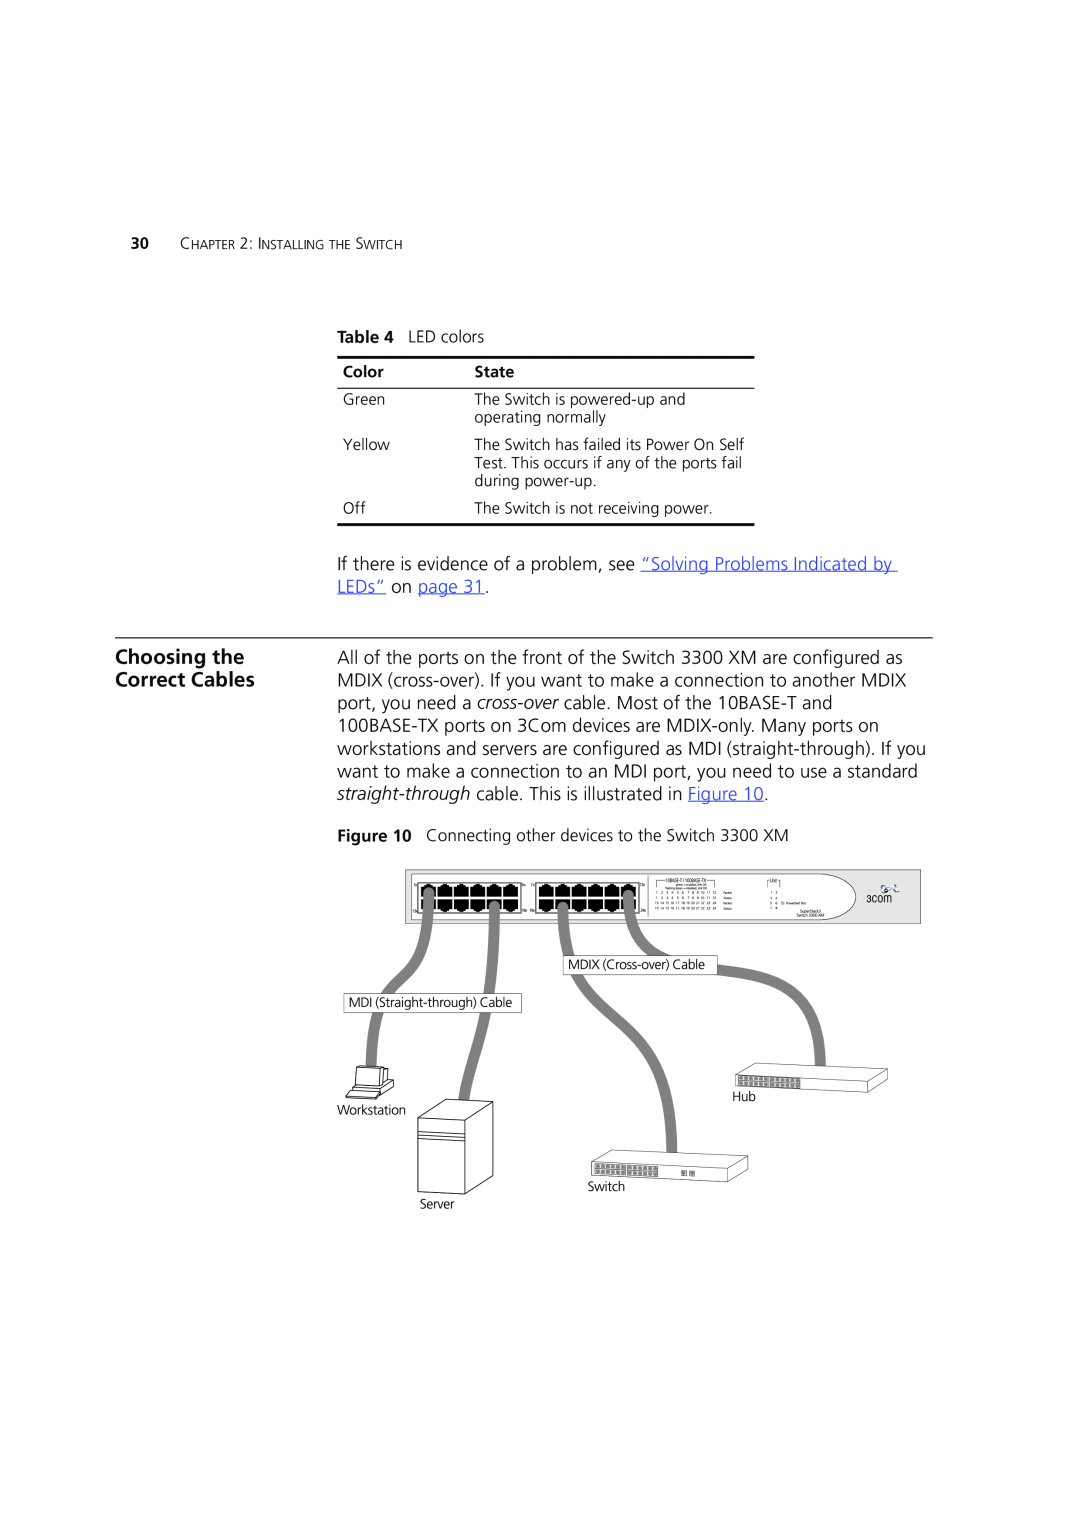 3Com DUA1698 manual Choosing the, Correct Cables, LEDs” on page 